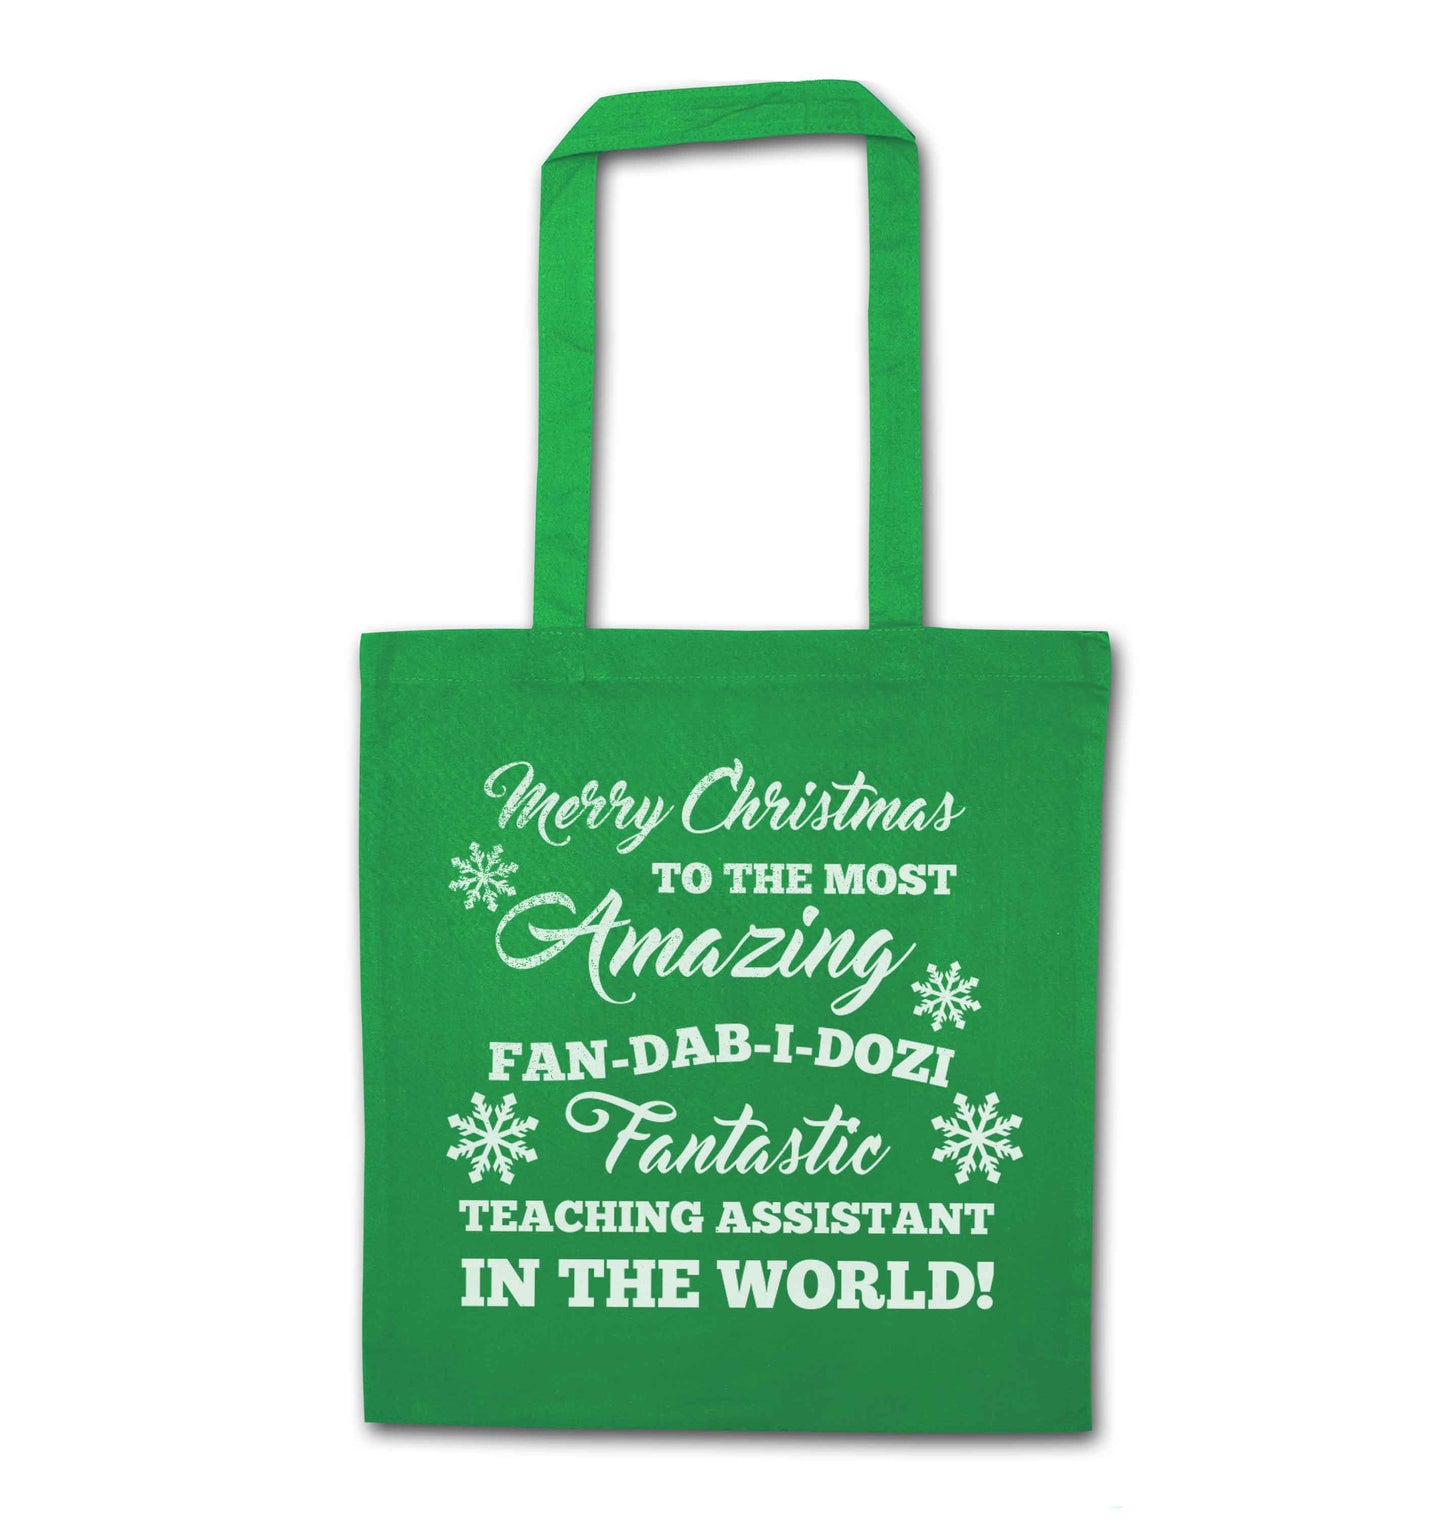 Merry Christmas to the most amazing fan-dab-i-dozi fantasic teaching assistant in the world green tote bag